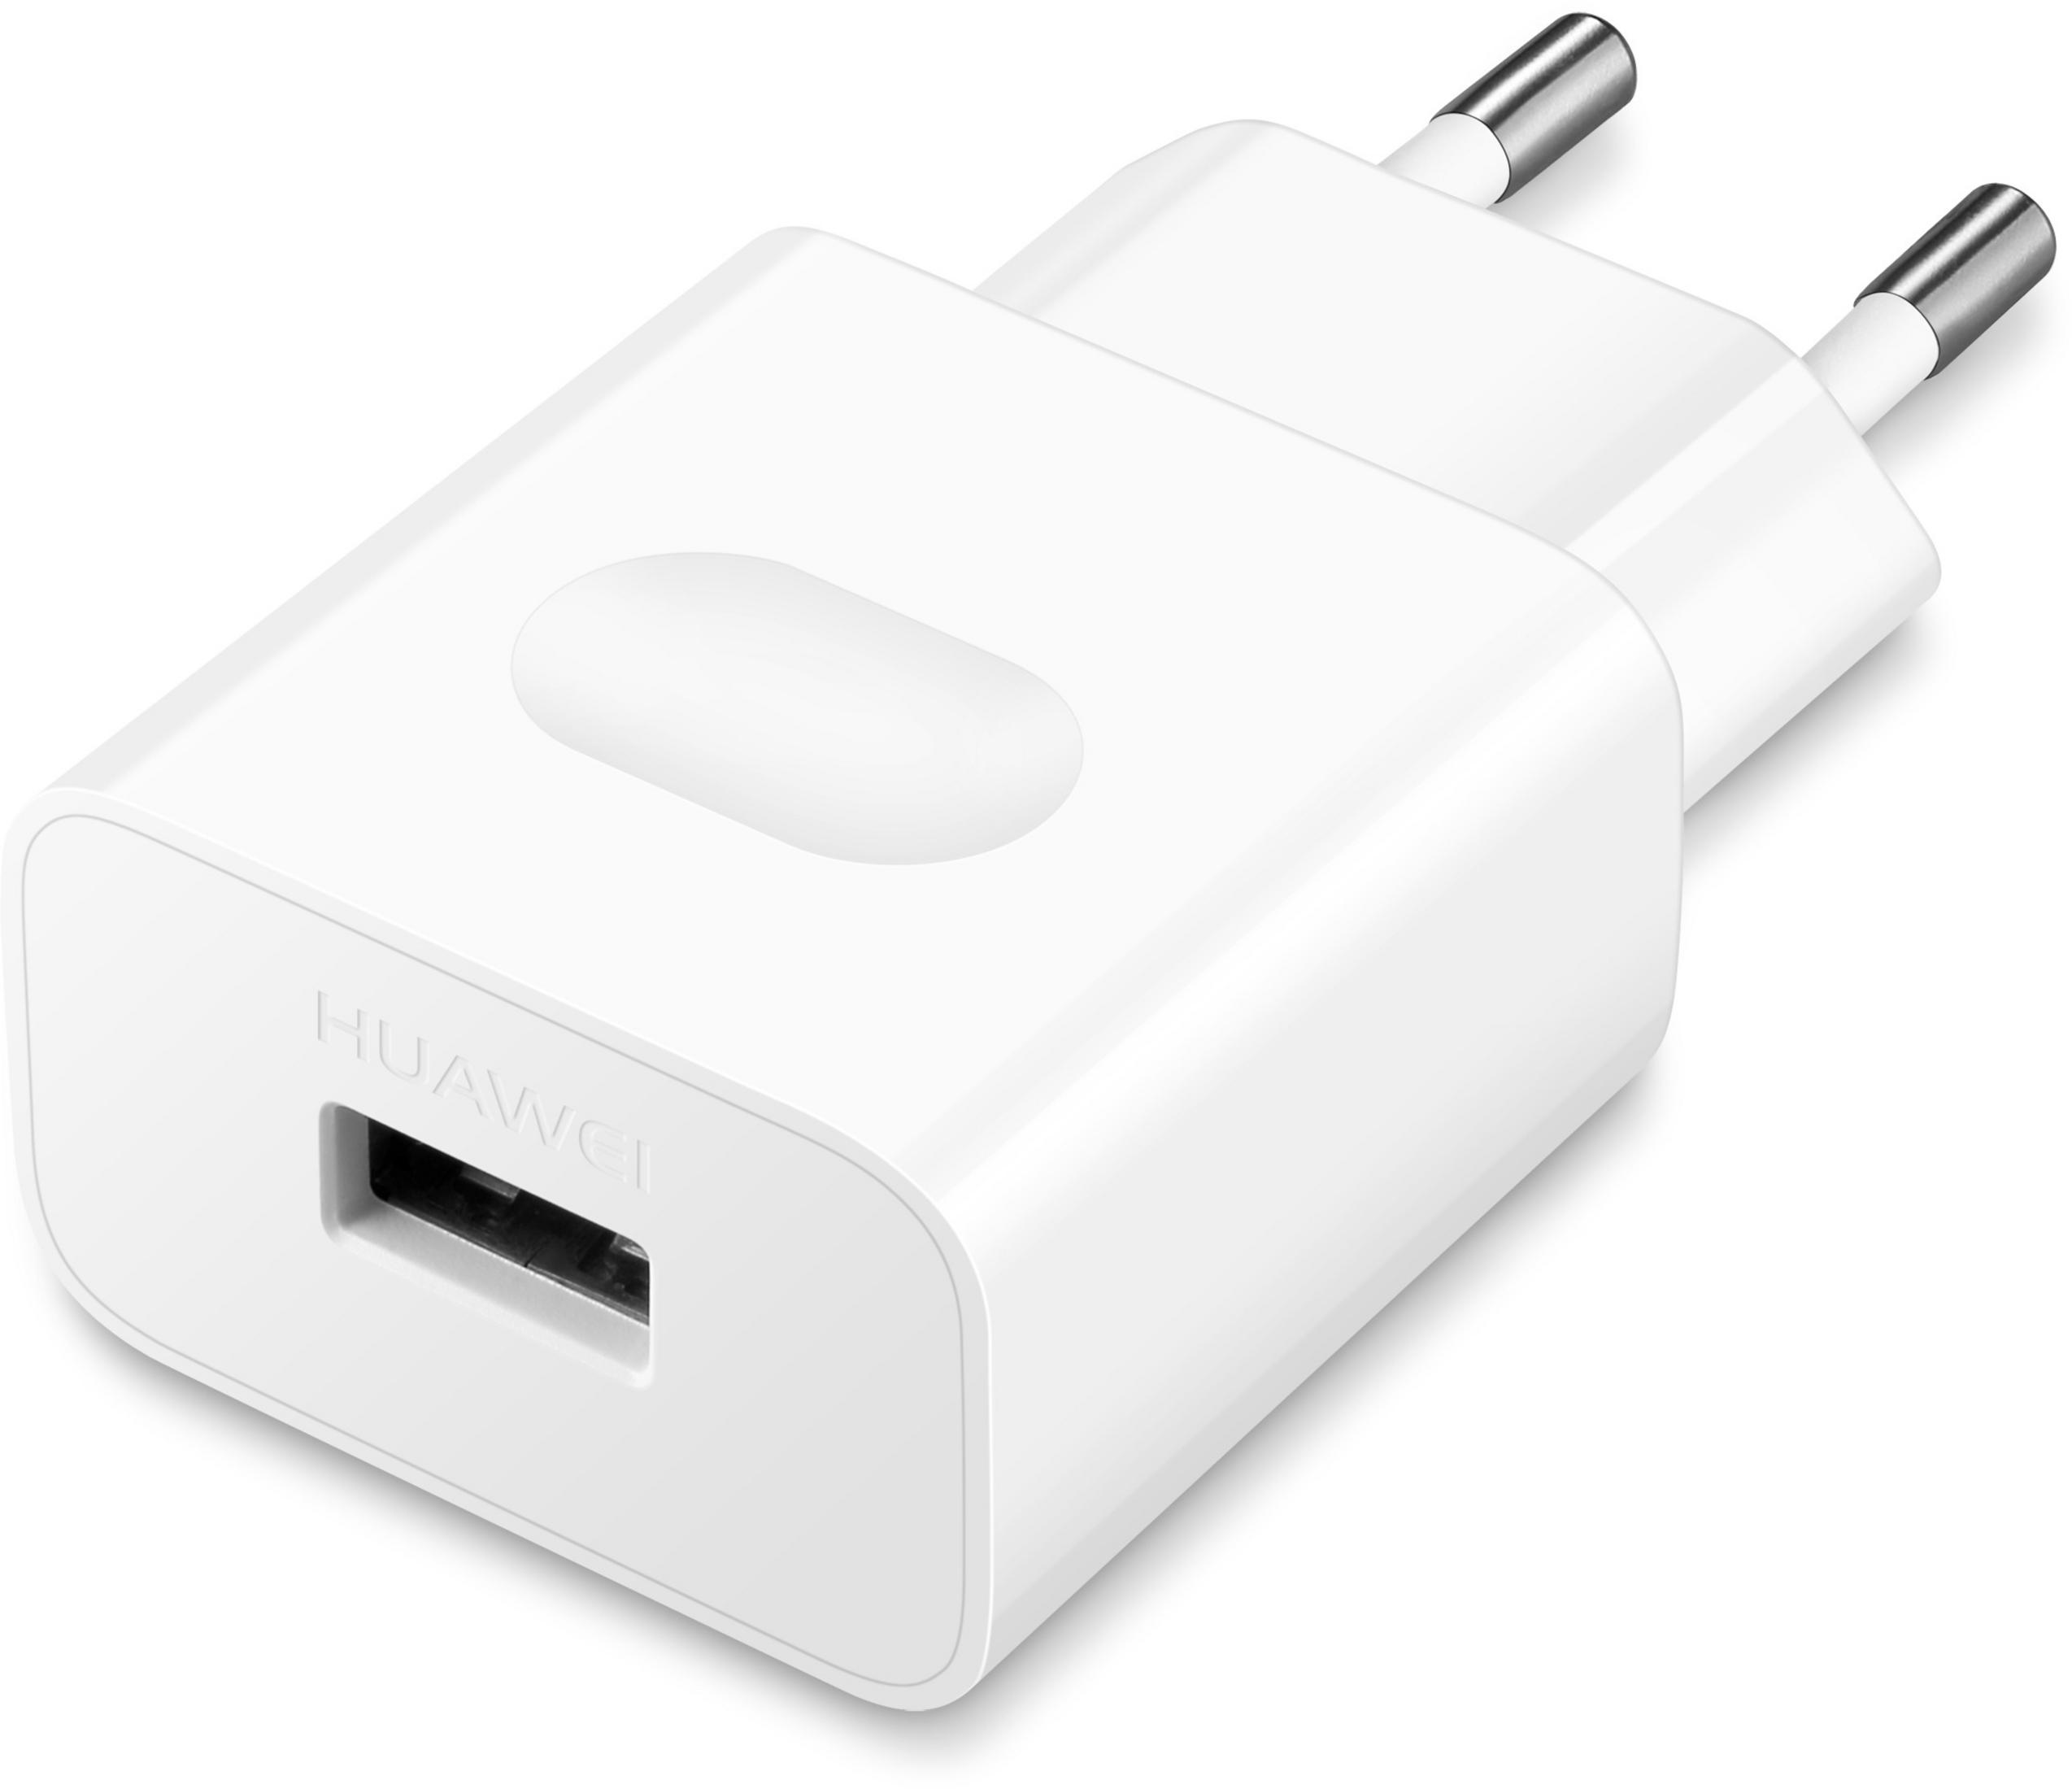 HUAWEI 190037 USB CHARGER USB-C 100 AP32 Volt, CABLE Ladegerät 240 Weiß - Universal